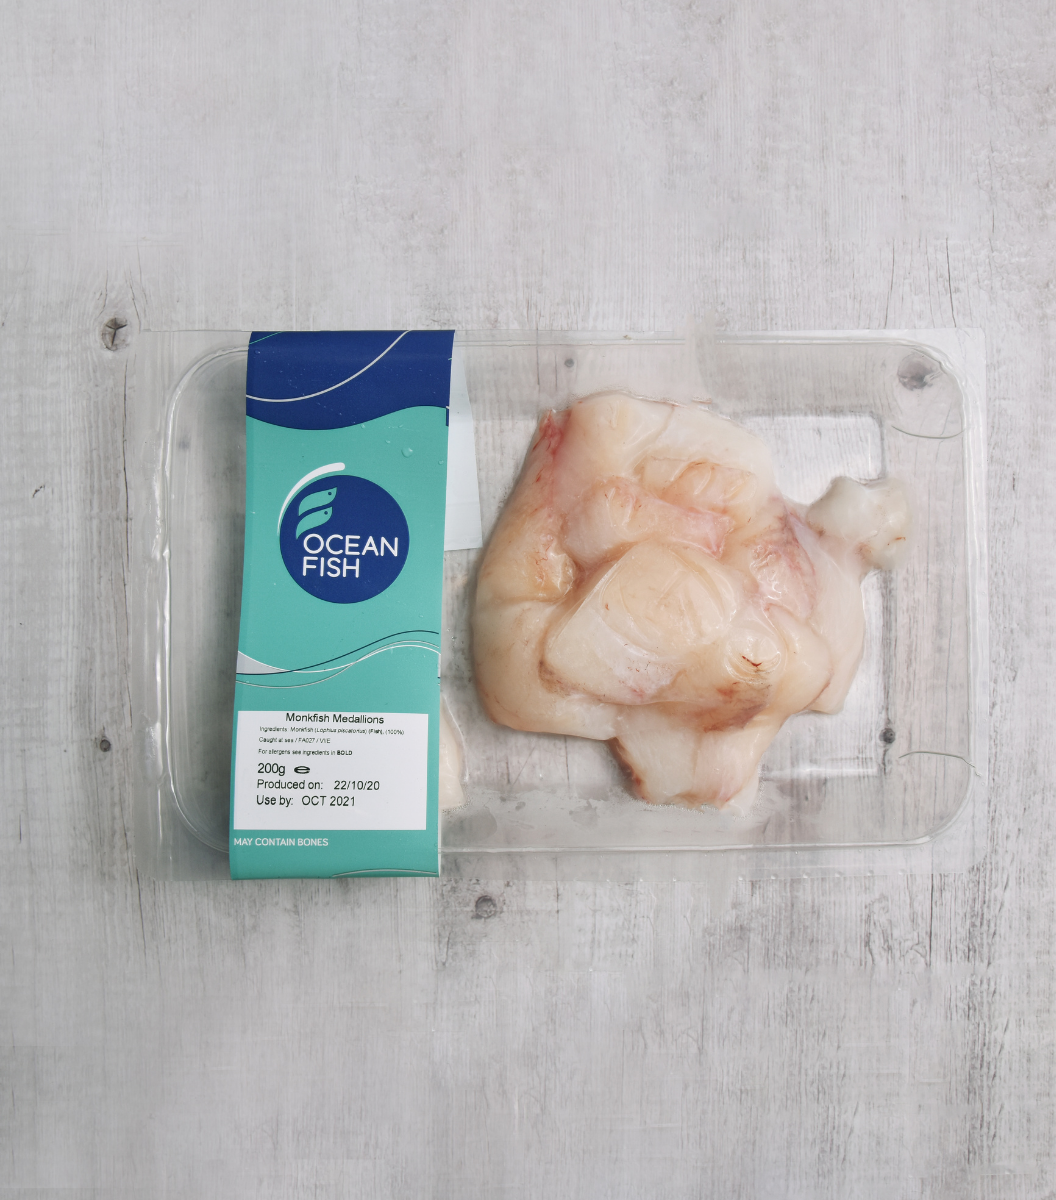 Frozen pack of Monkfish Medallions 200g | Sasha's Fine Foods Online Grocery Store Singapore